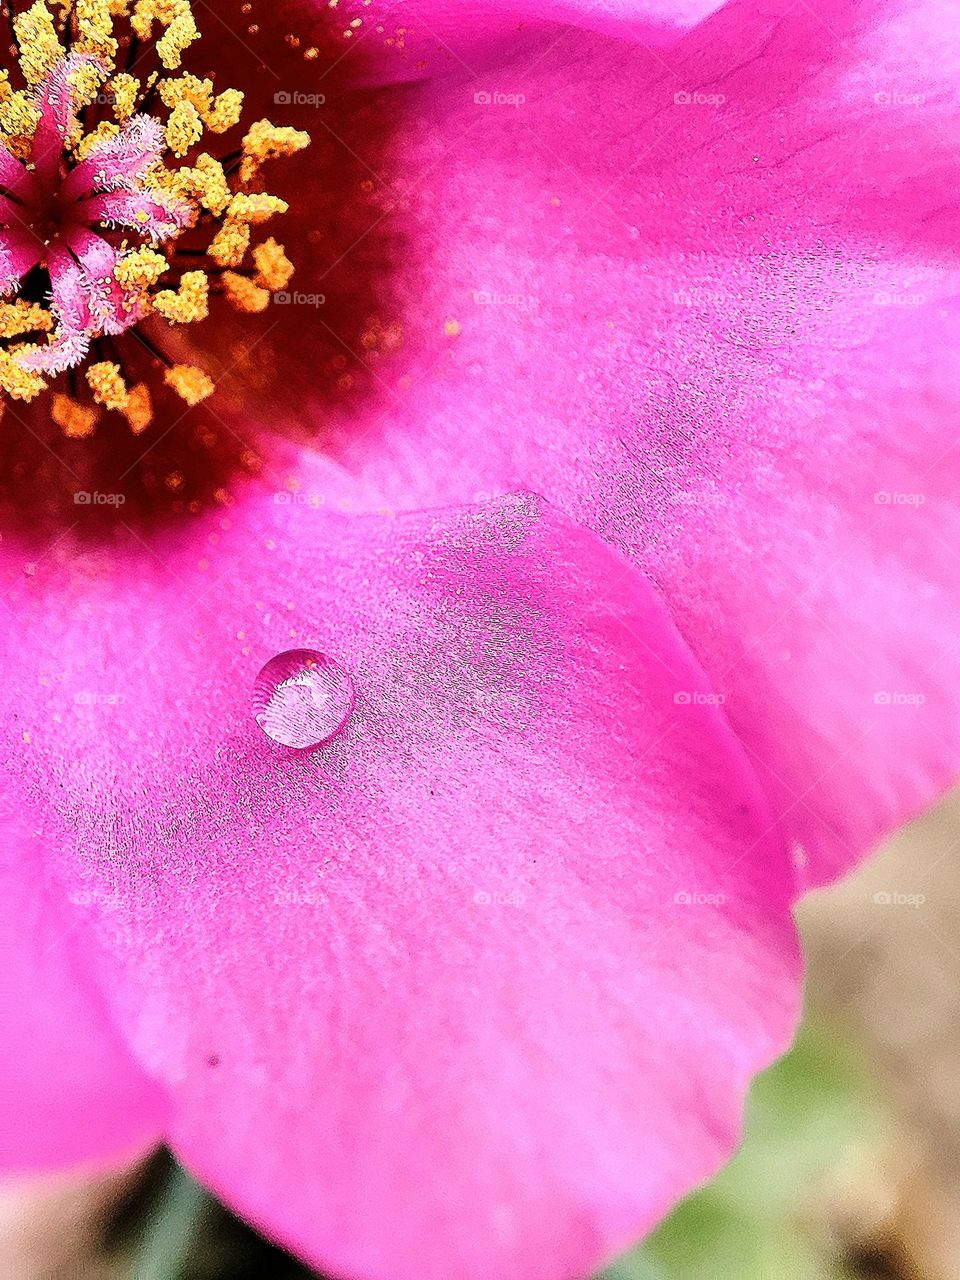 10 O'clock flower with droplet